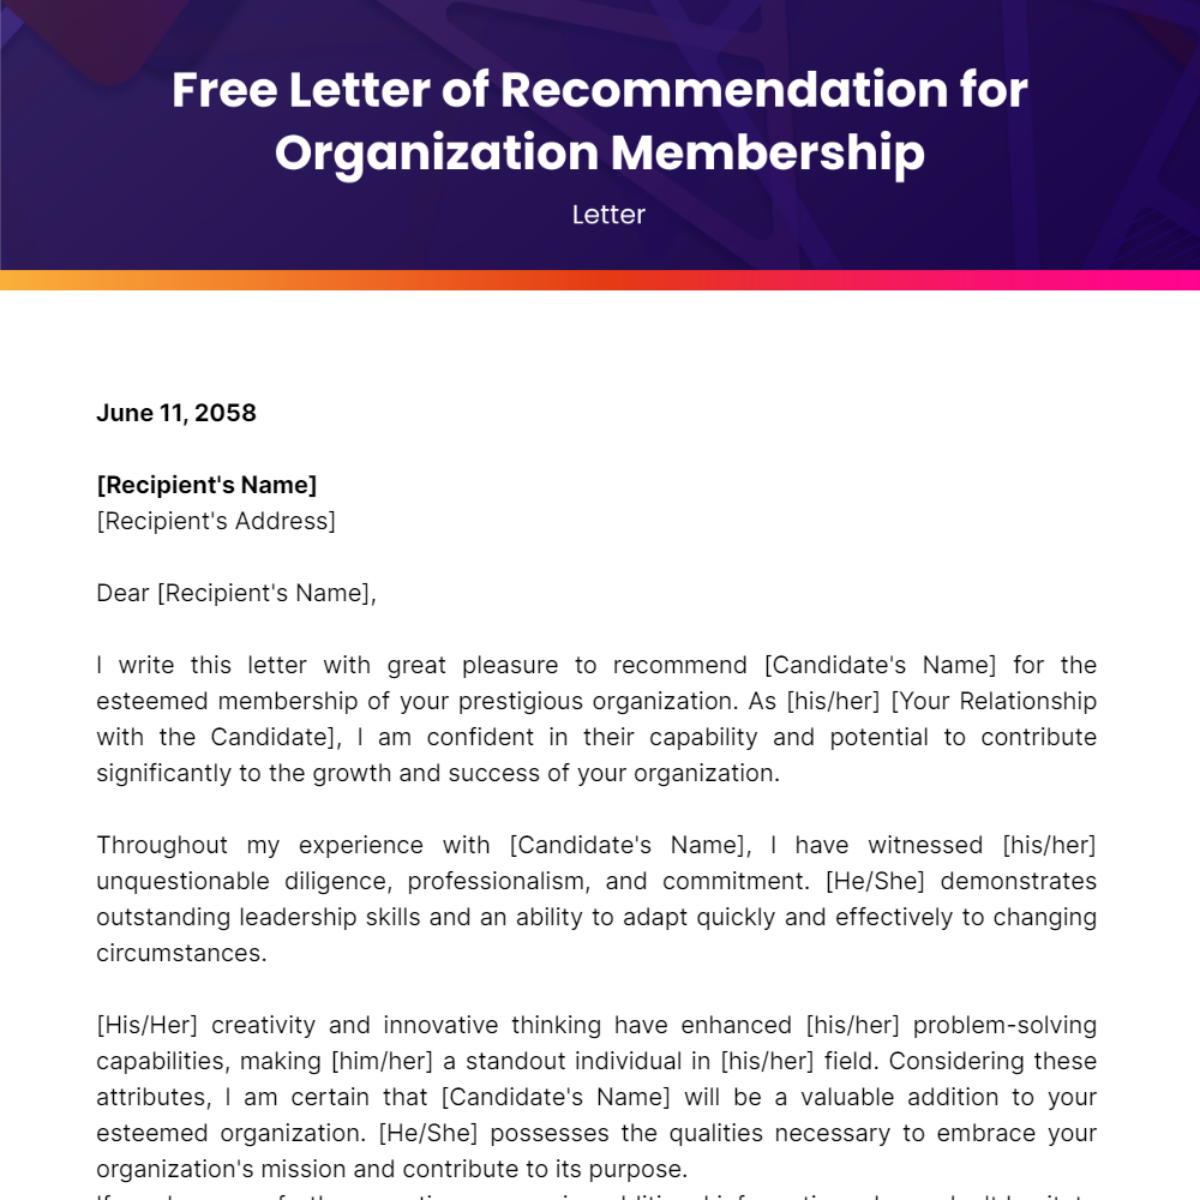 Letter of Recommendation for Organization Membership Template